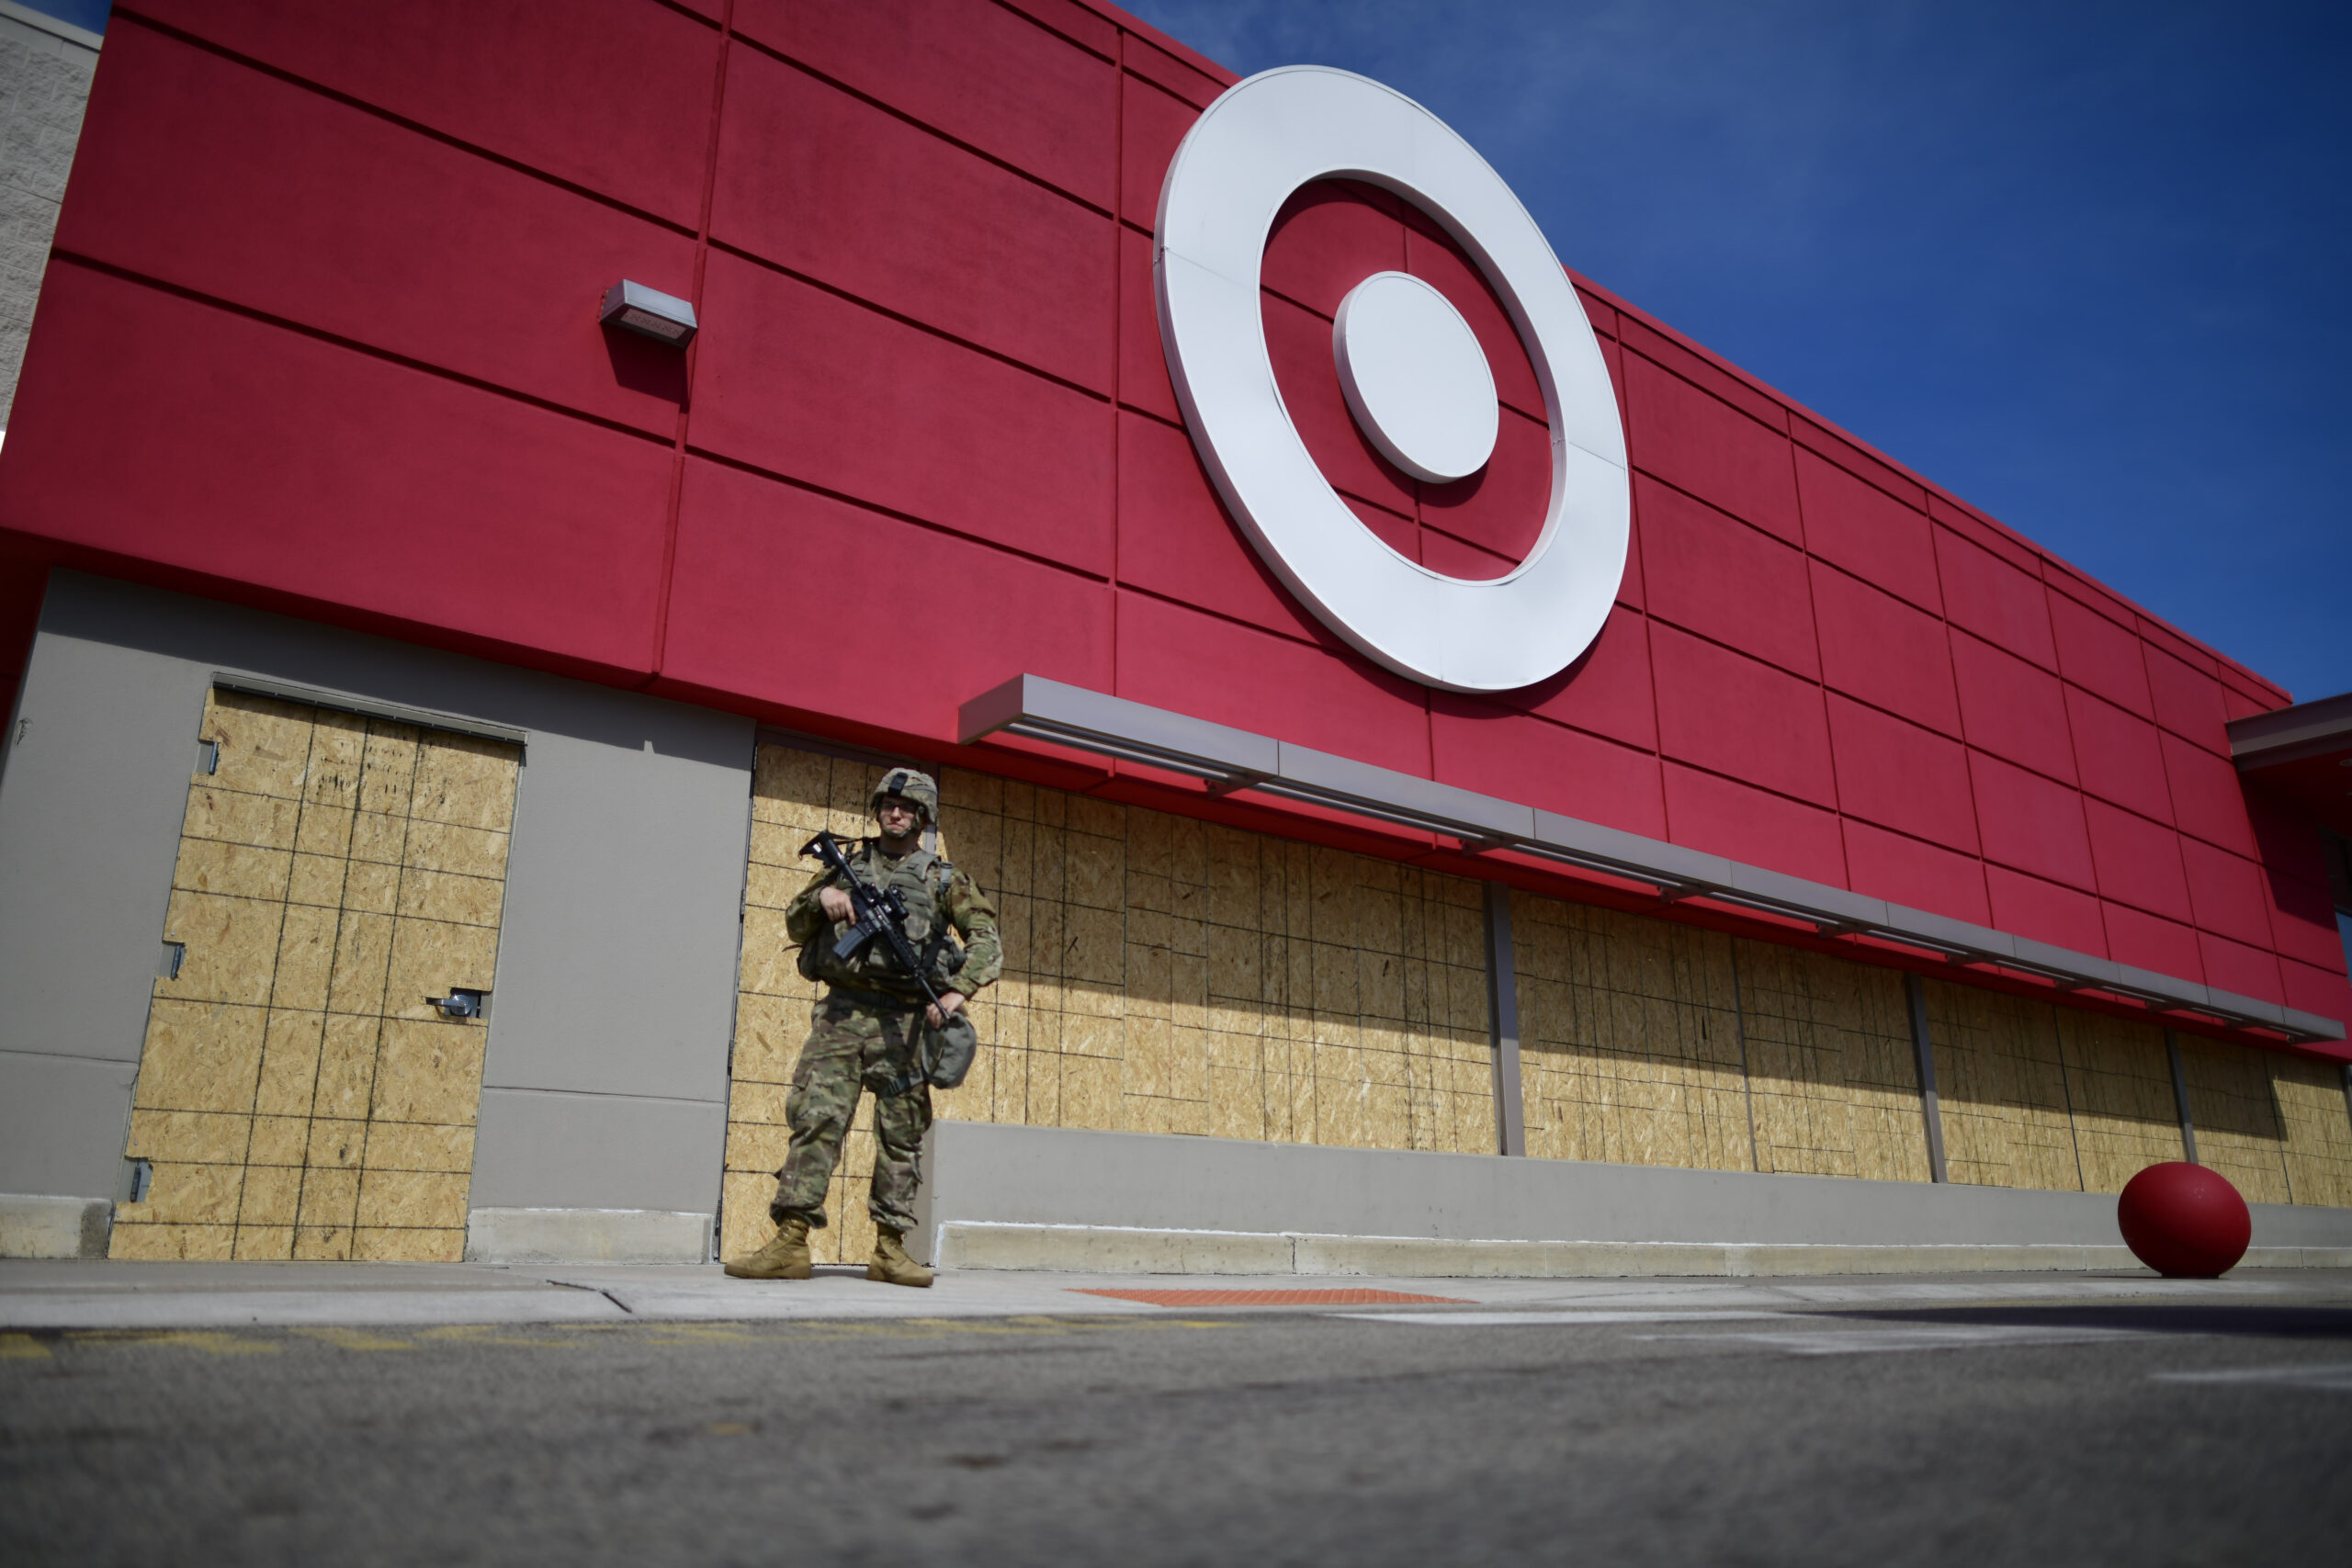 Target executives report that retail theft is causing significant losses.